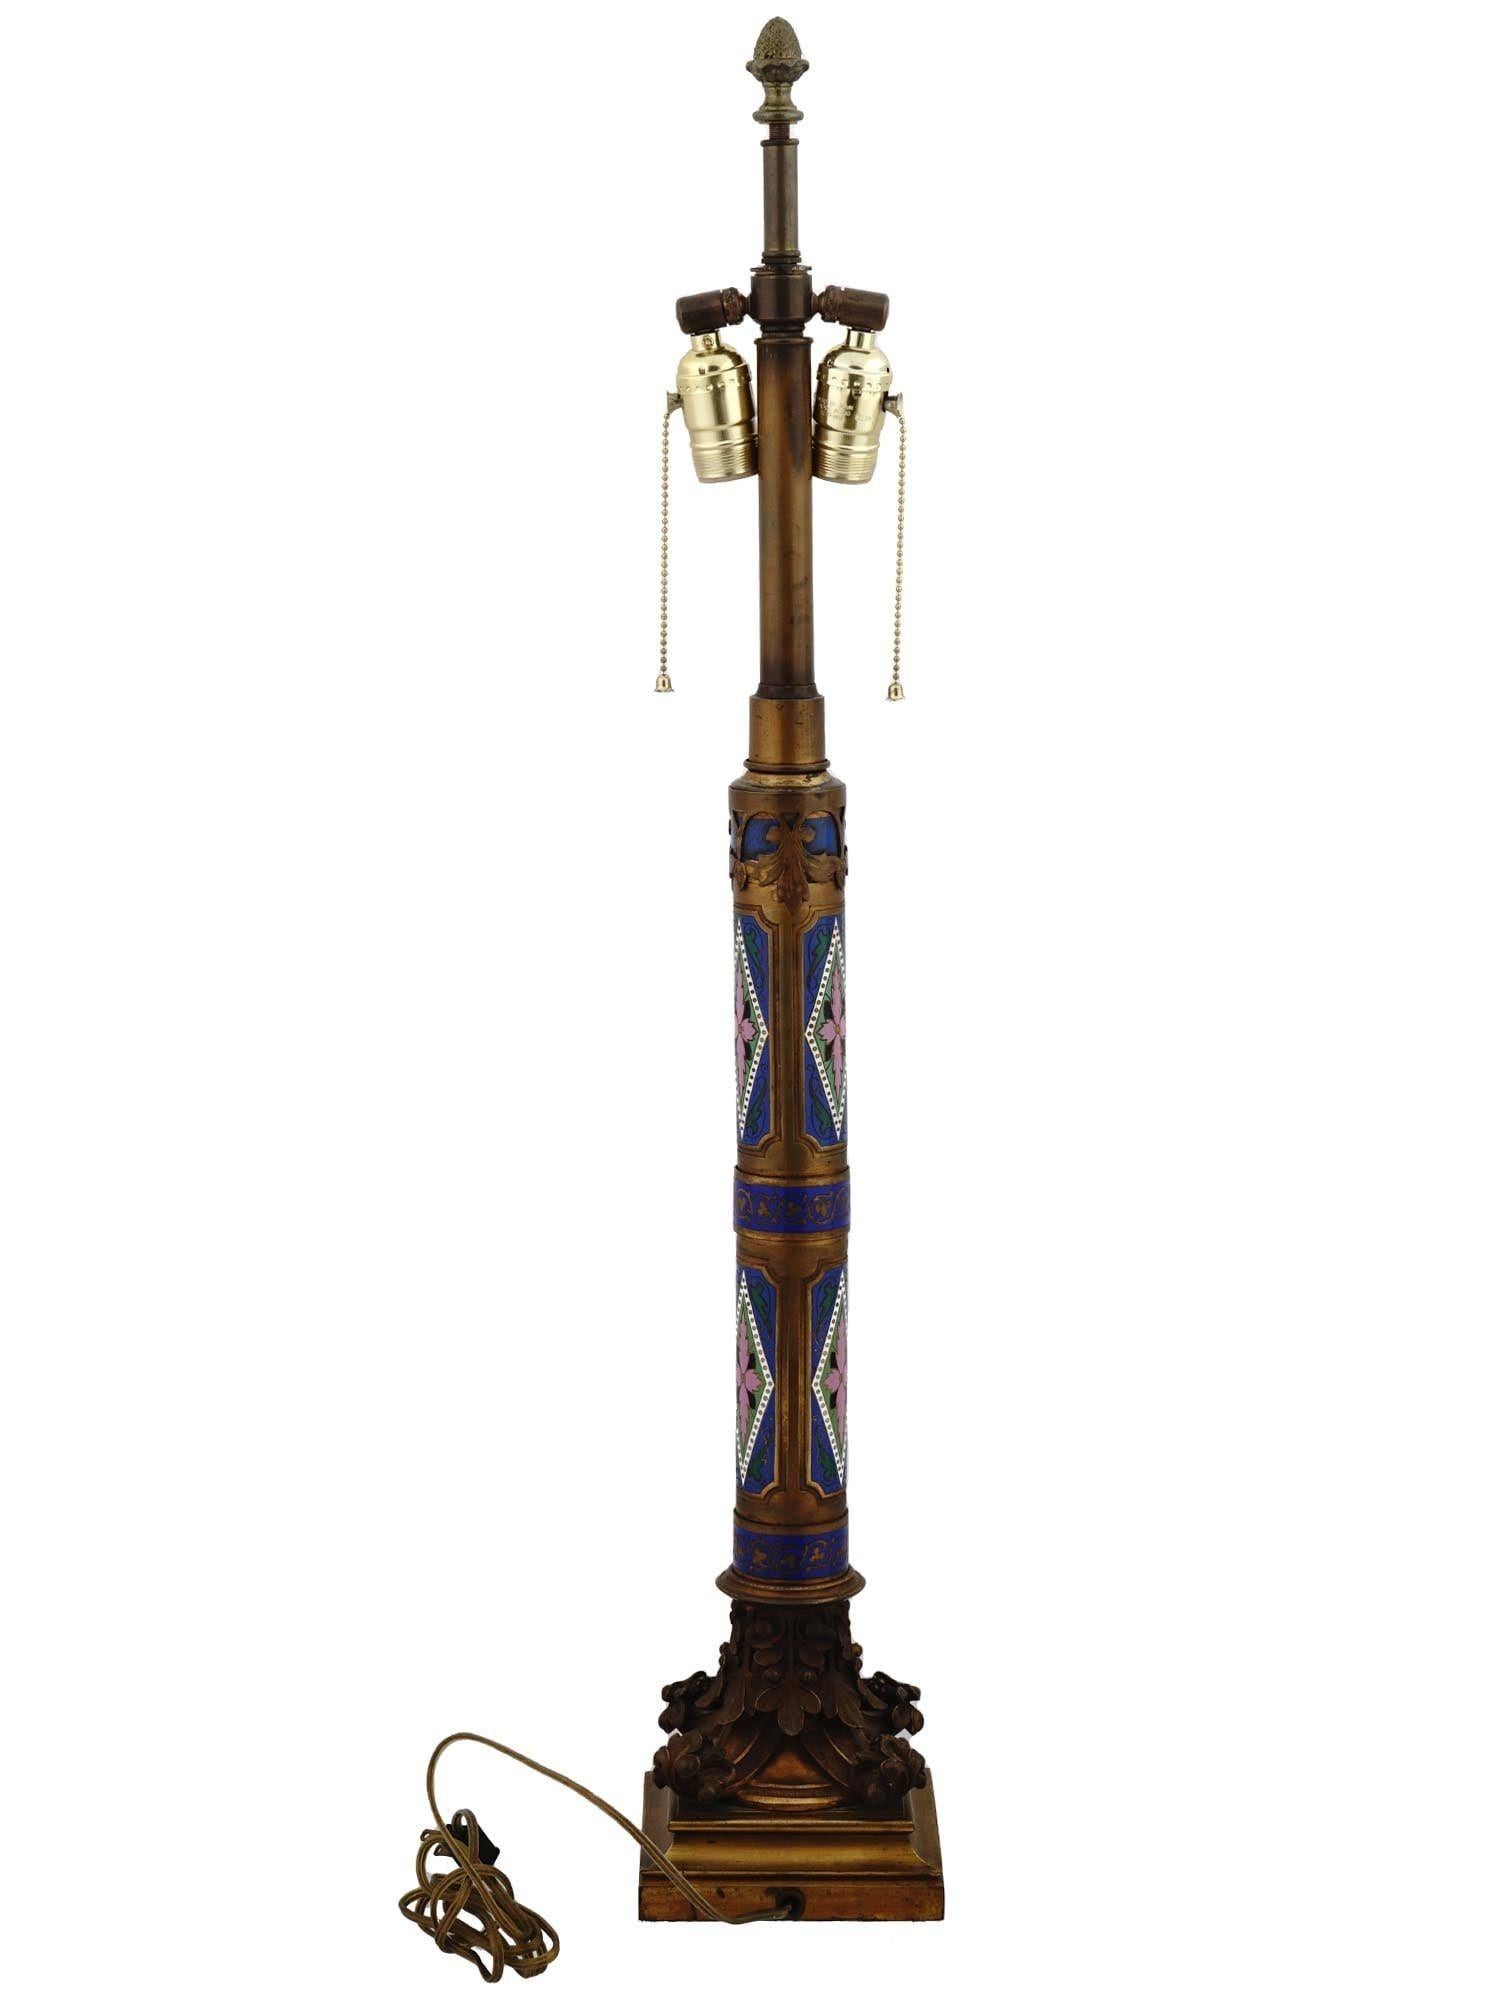 Antique Champleve Enameled Bronze Table Lamp Attributed to Caldwell  In Good Condition For Sale In New York, NY